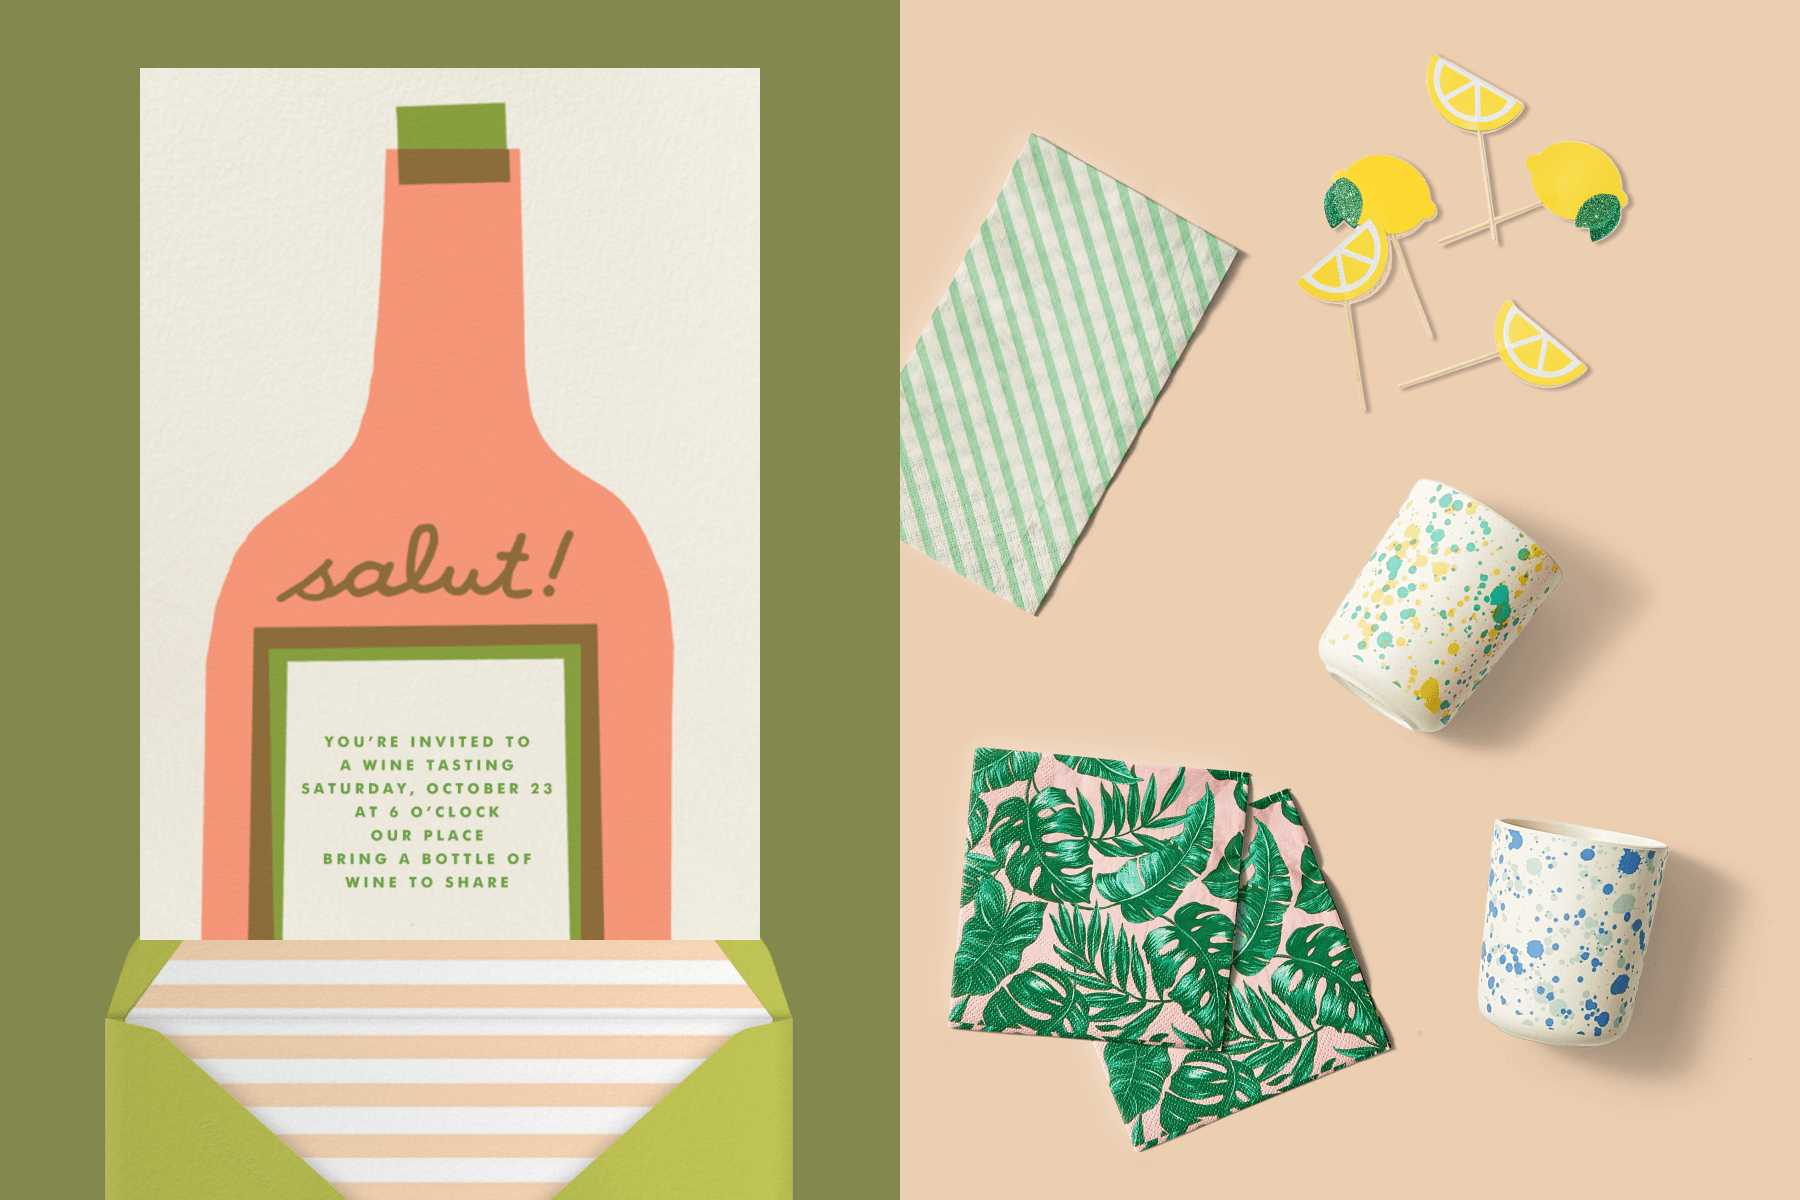 Left: An invitation featuring an illustration of a bottle of wine; Right: Party Shop supplies including cups, toothpicks, and napkins.